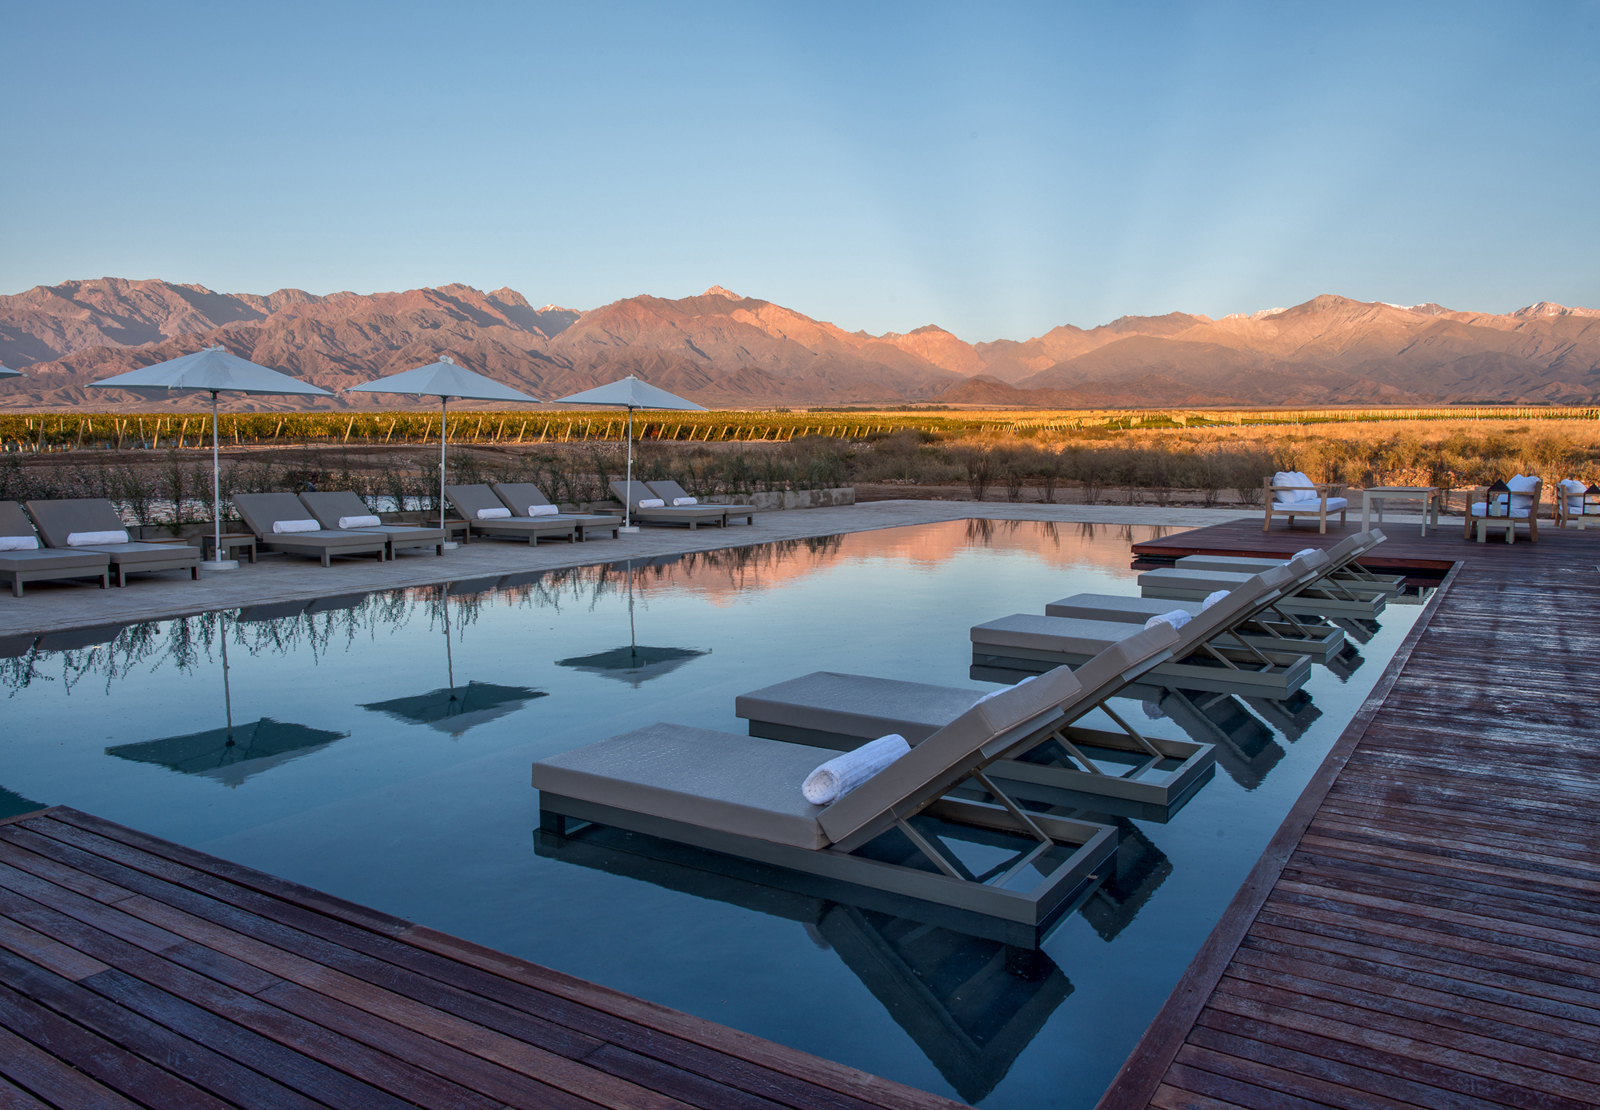 The outdoor pool at The Vines Resort and Spa in Mendoza, Argentina - one of Five Star Alliance's newest luxury hotels